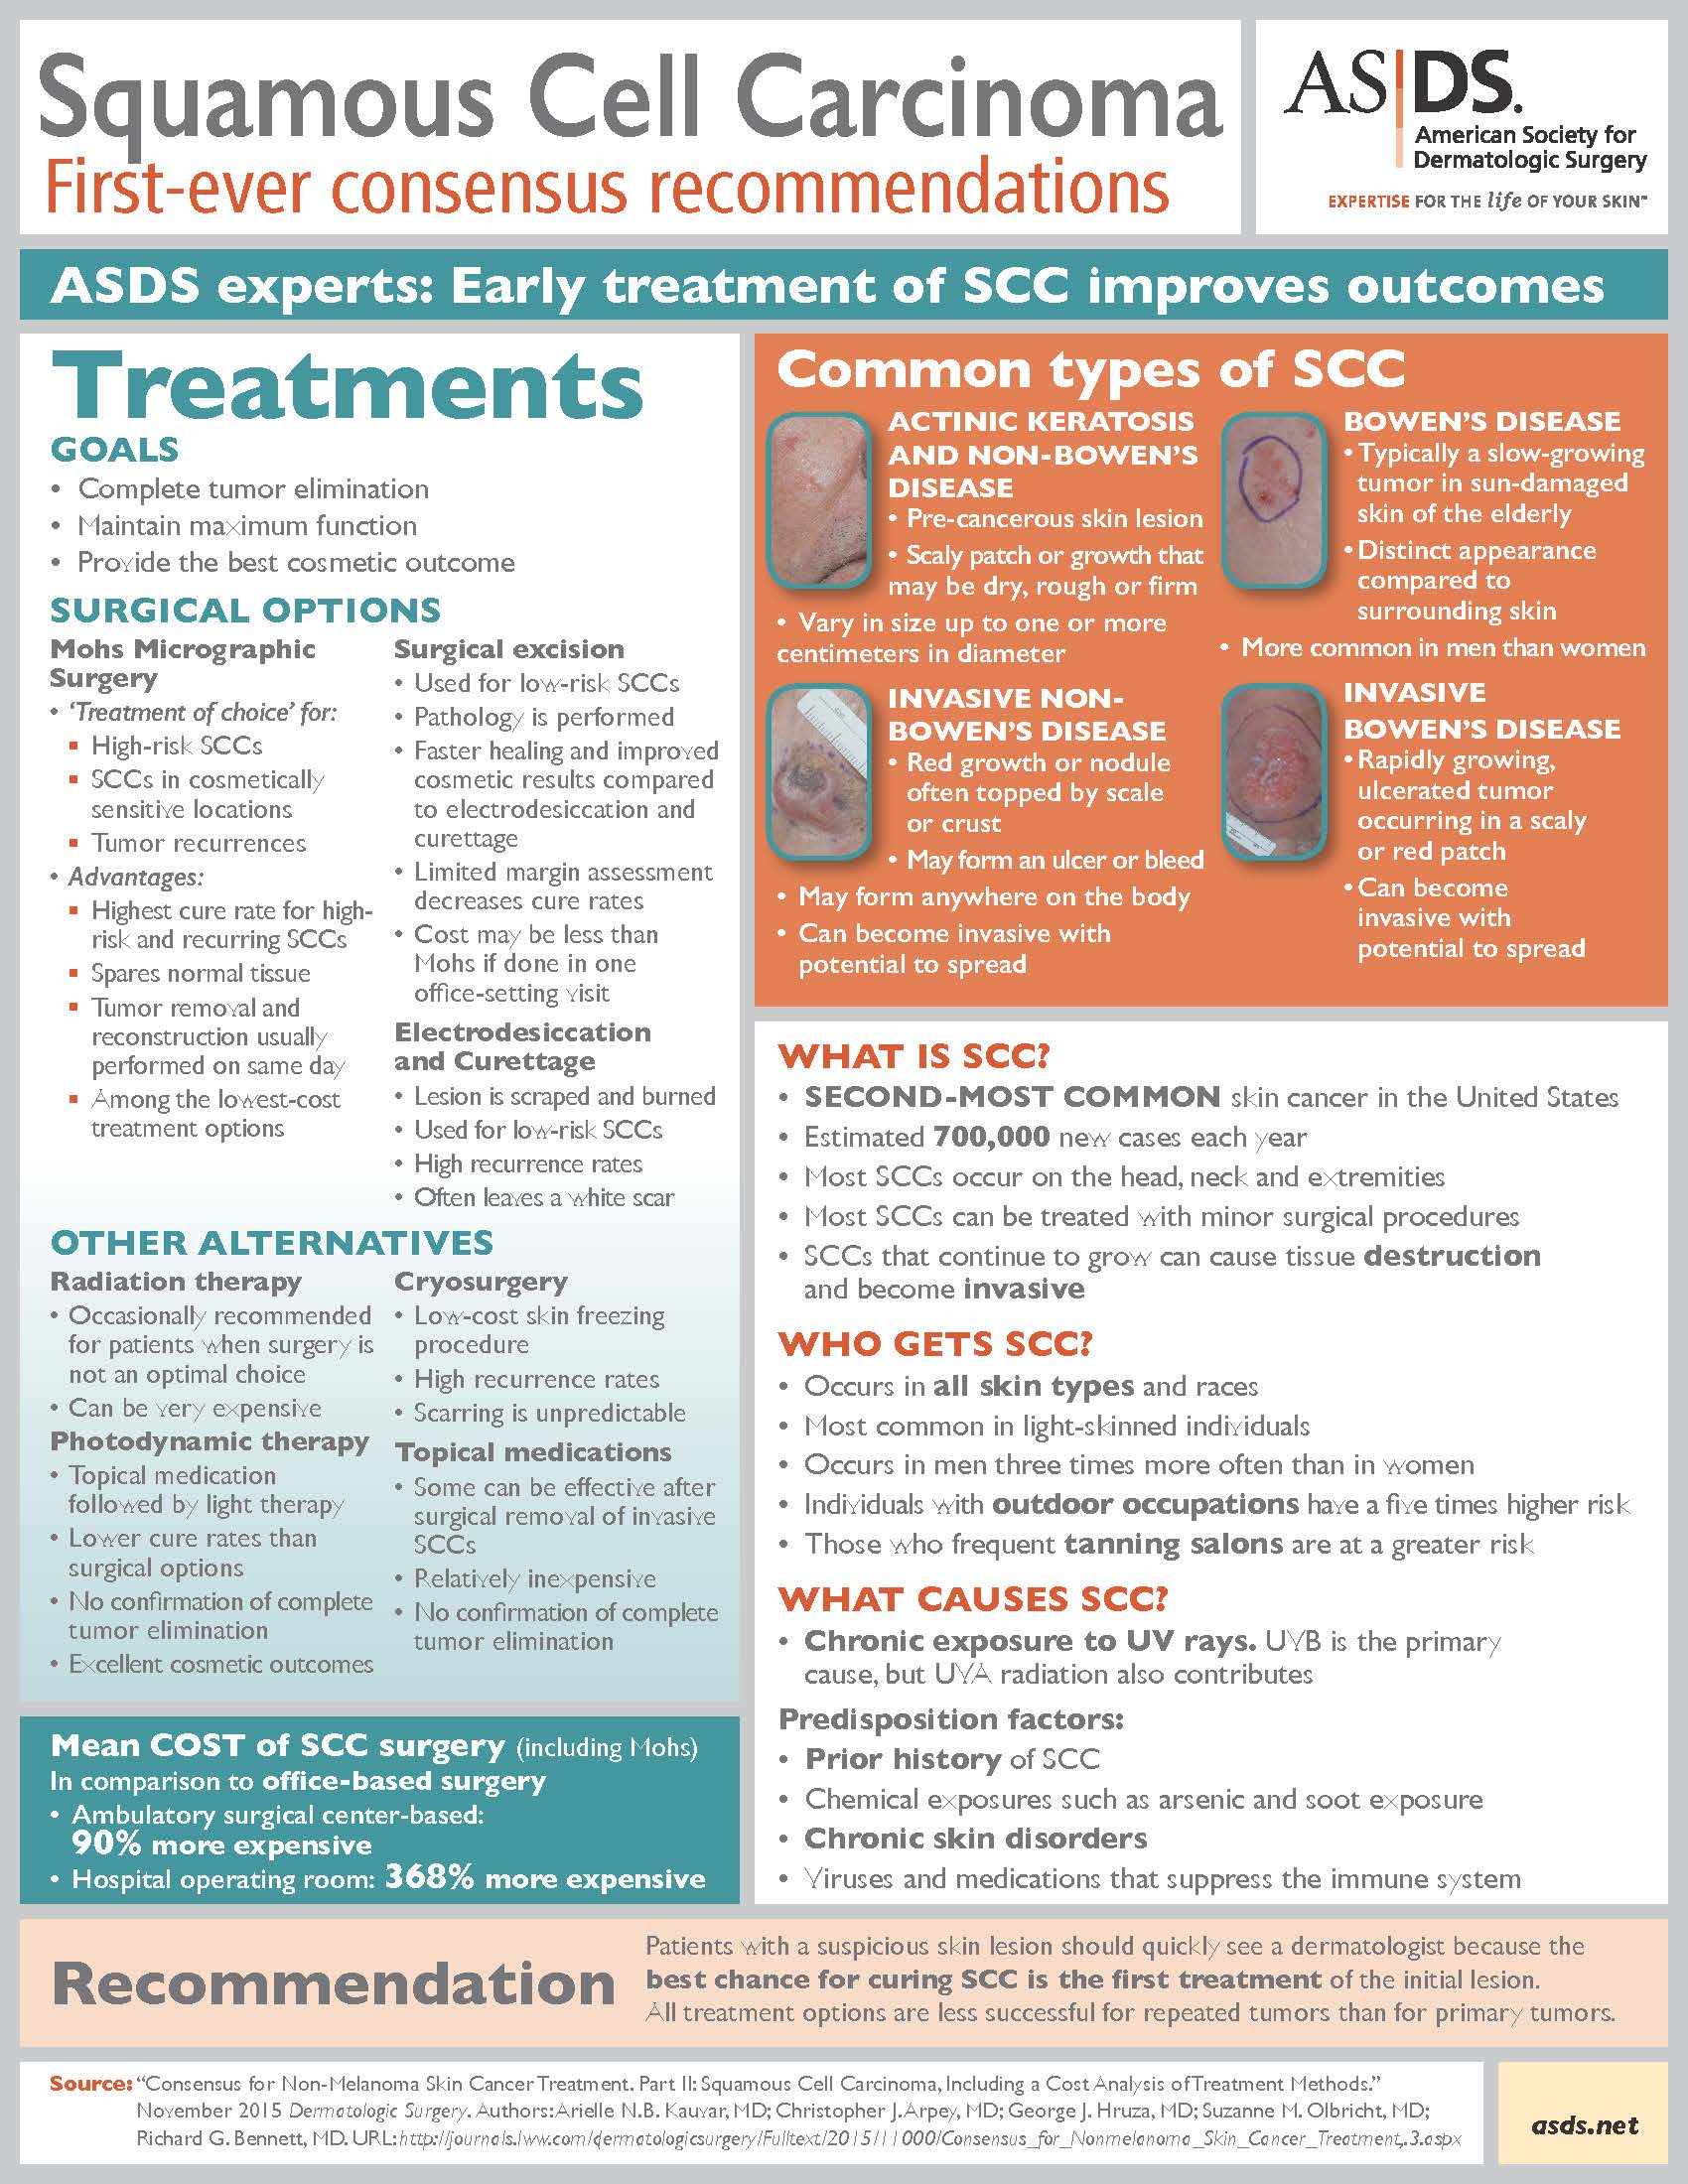 ASDS releases squamous cell carcinoma recommendations